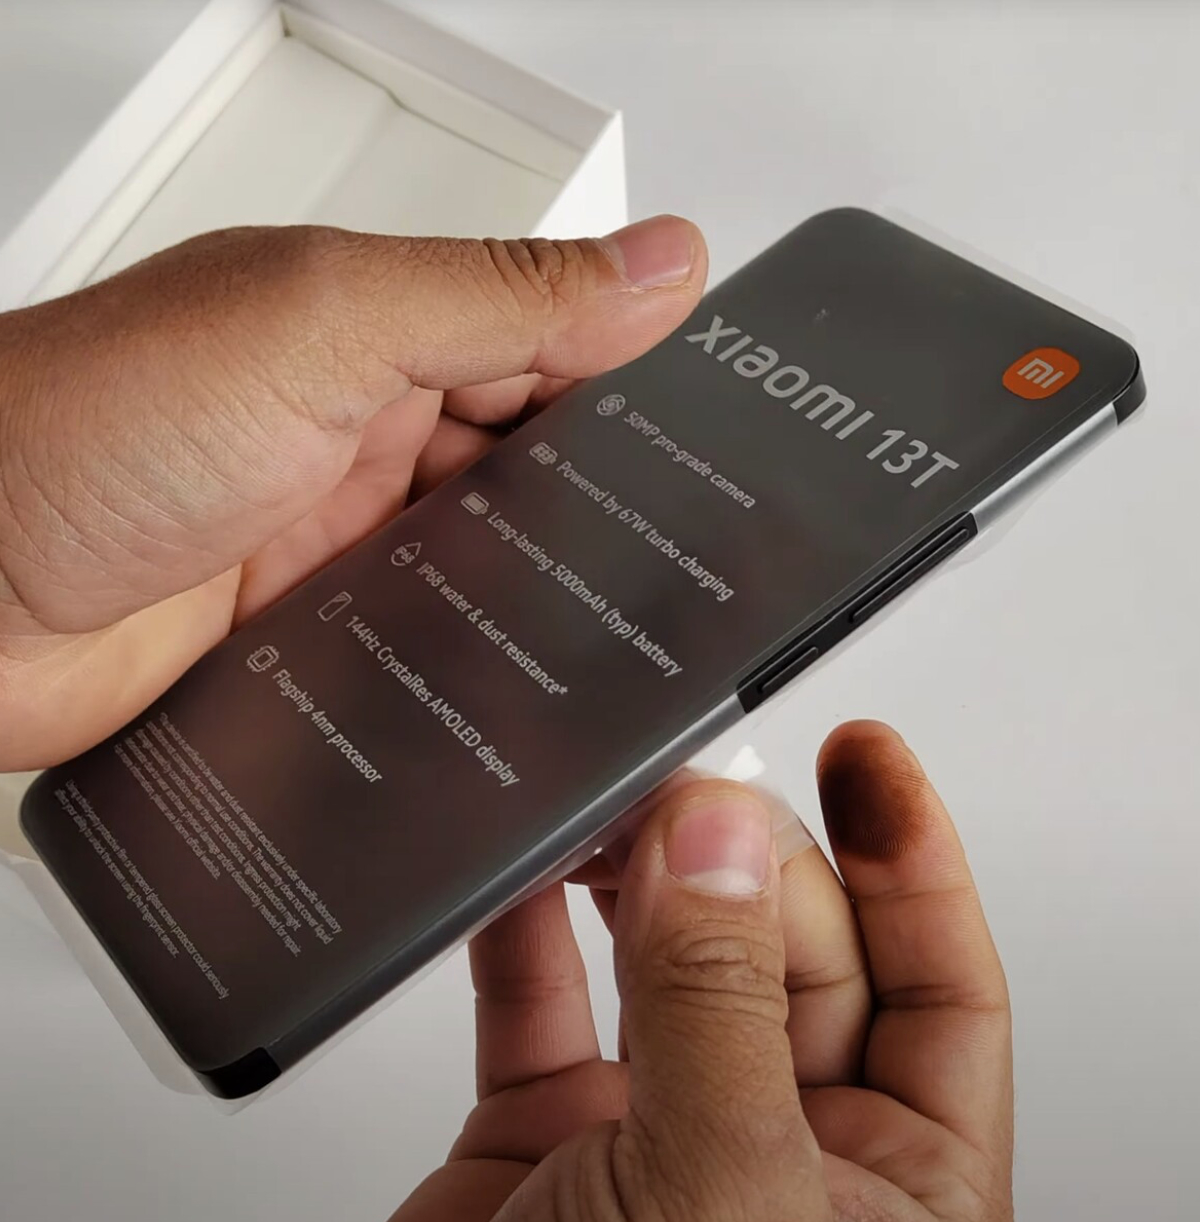 Redmi 13C Unboxing And Review: Camera Test and Design 